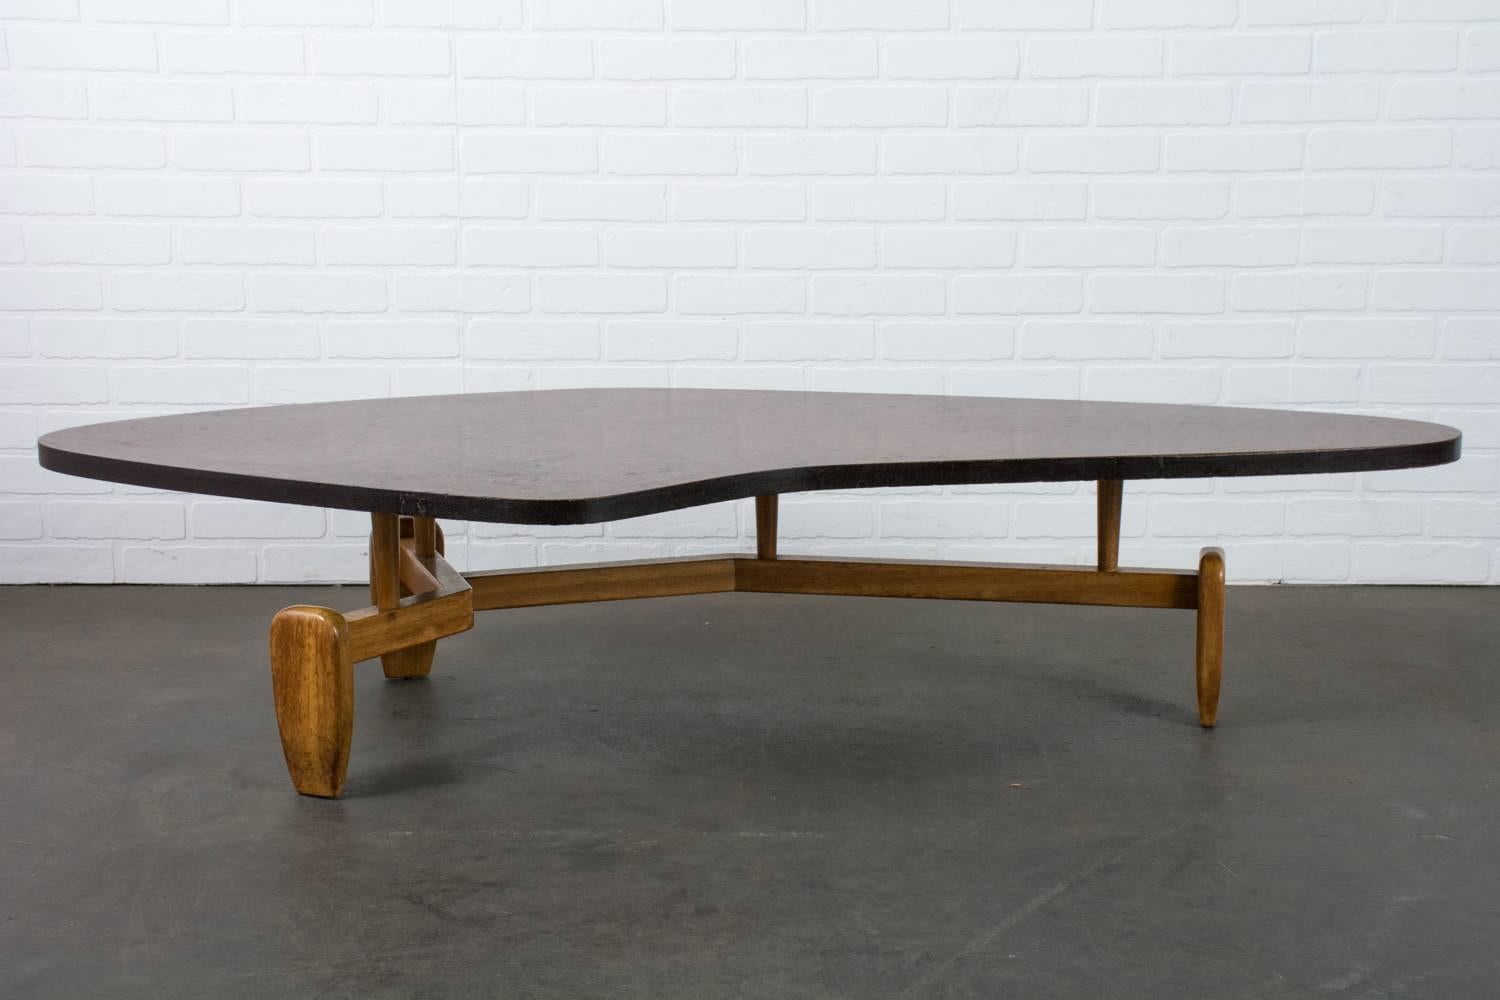 This Mid-Century Modern coffee table was designed by John Keal for Brown Saltman in the 1950s. The boomerang/amoeba style floating top is a made of a composite wood that has an interesting variation in tones. The sculptural legs and stretchers are